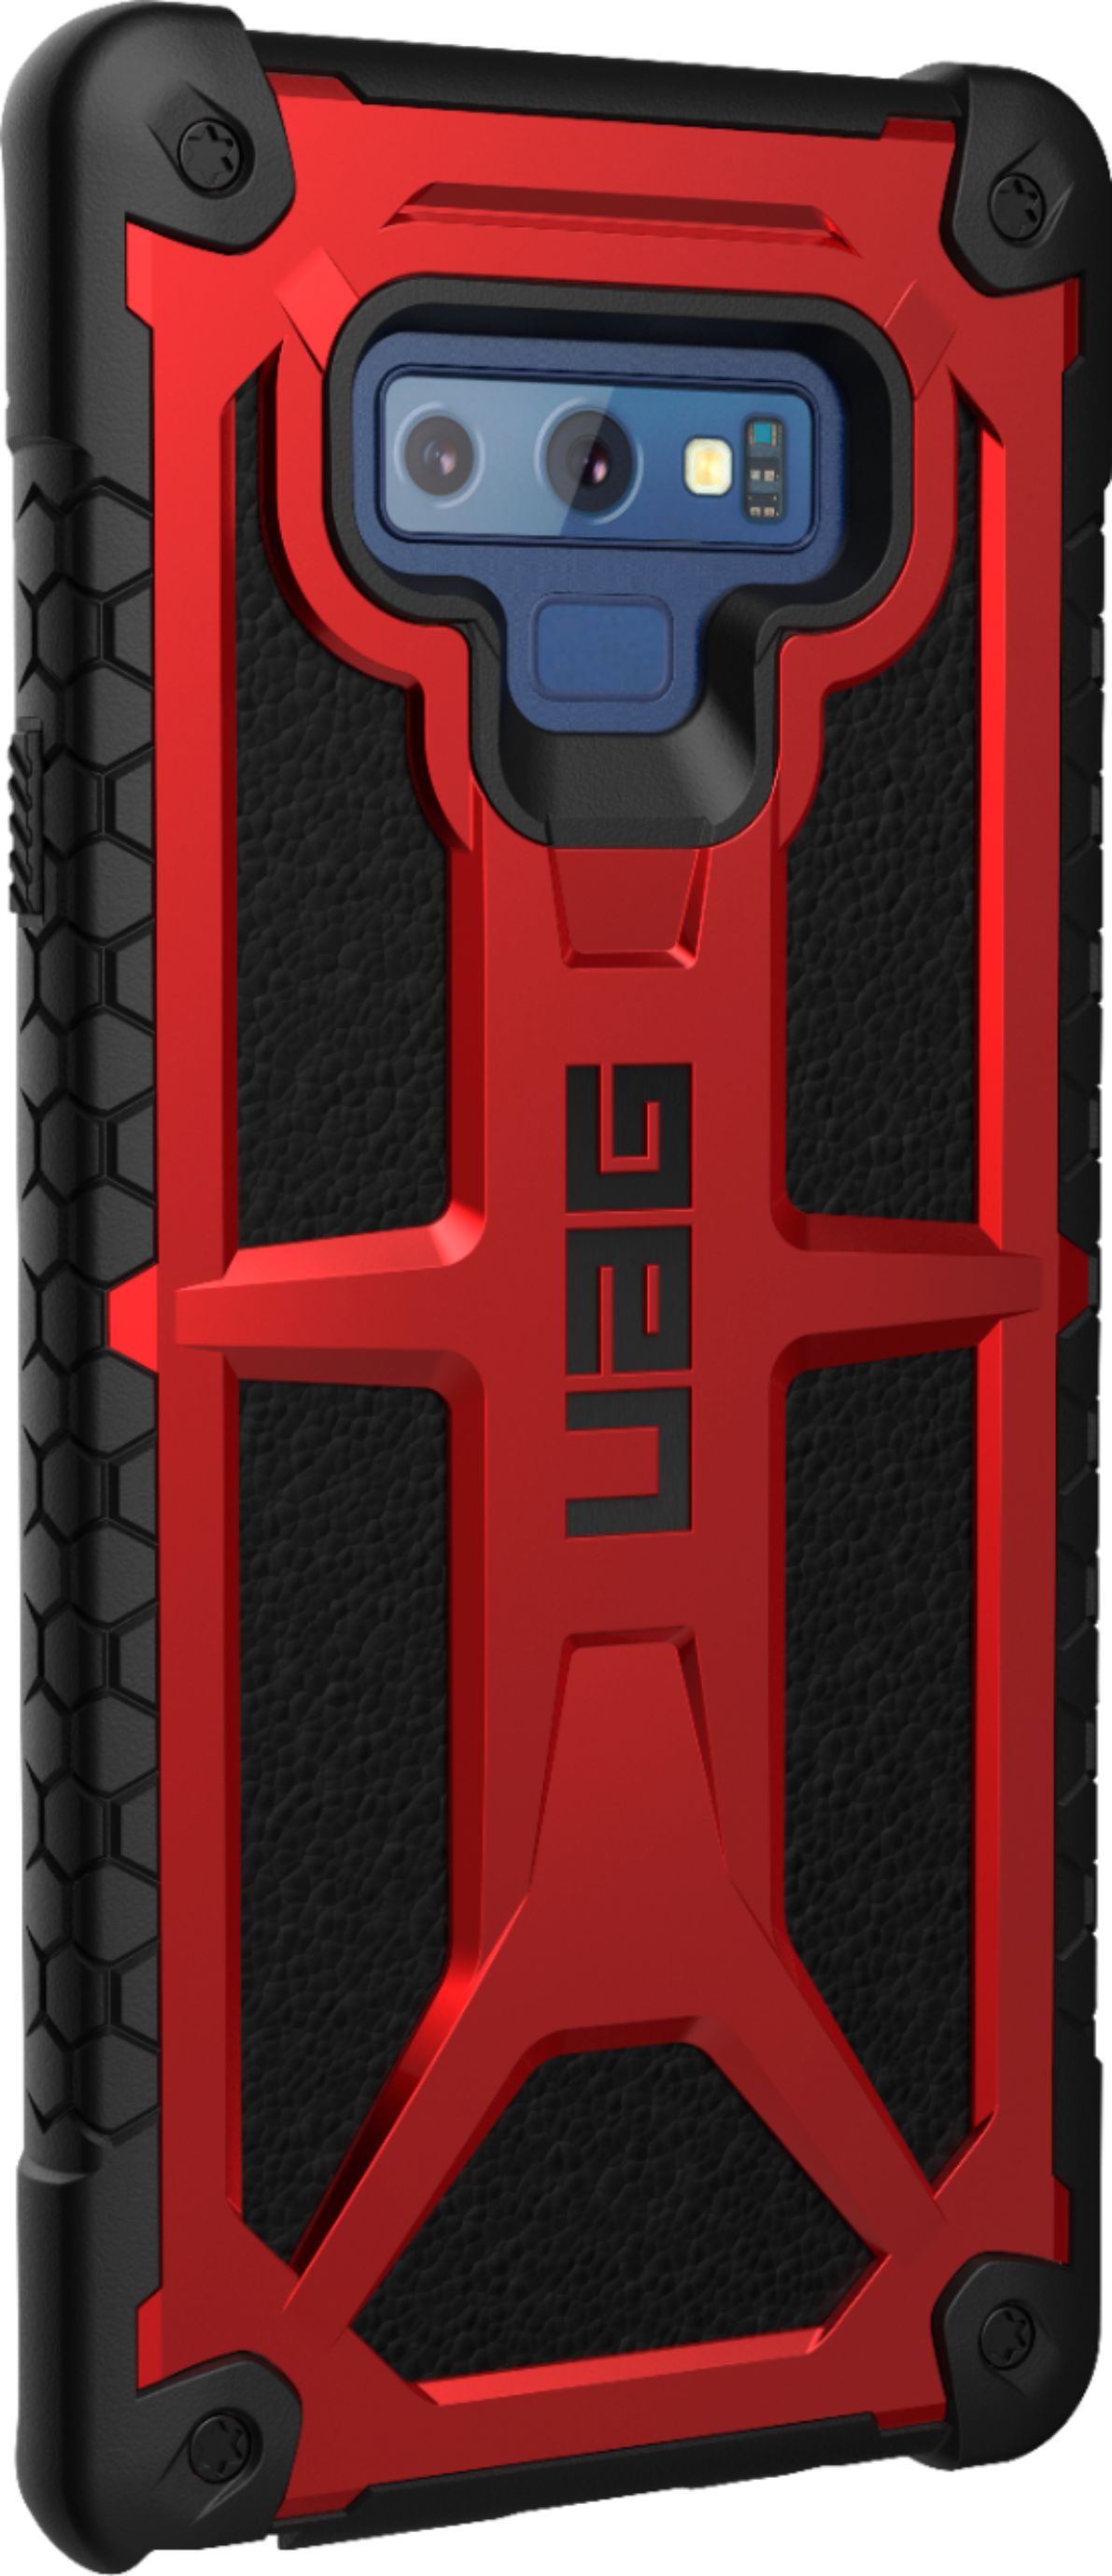 Angle View: UAG - Monarch Series Case for Samsung Galaxy Note9 - Crimson Red